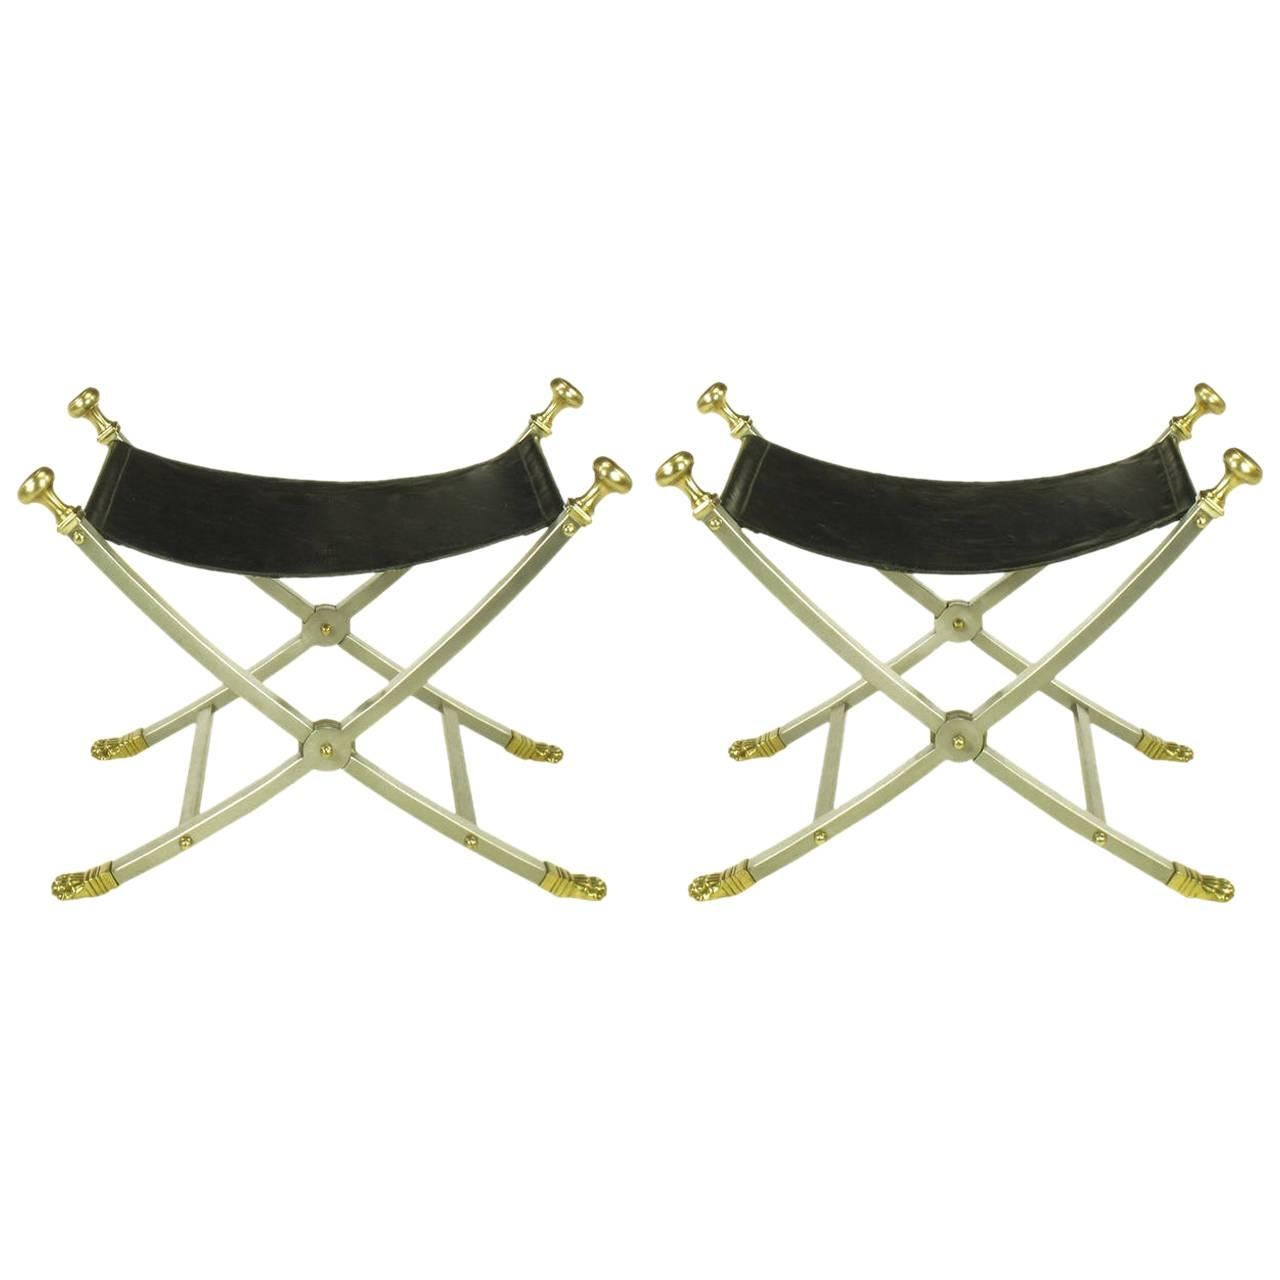 Pair of Maison Jansen Black Leather, Brass and Brushed Nickel Benches